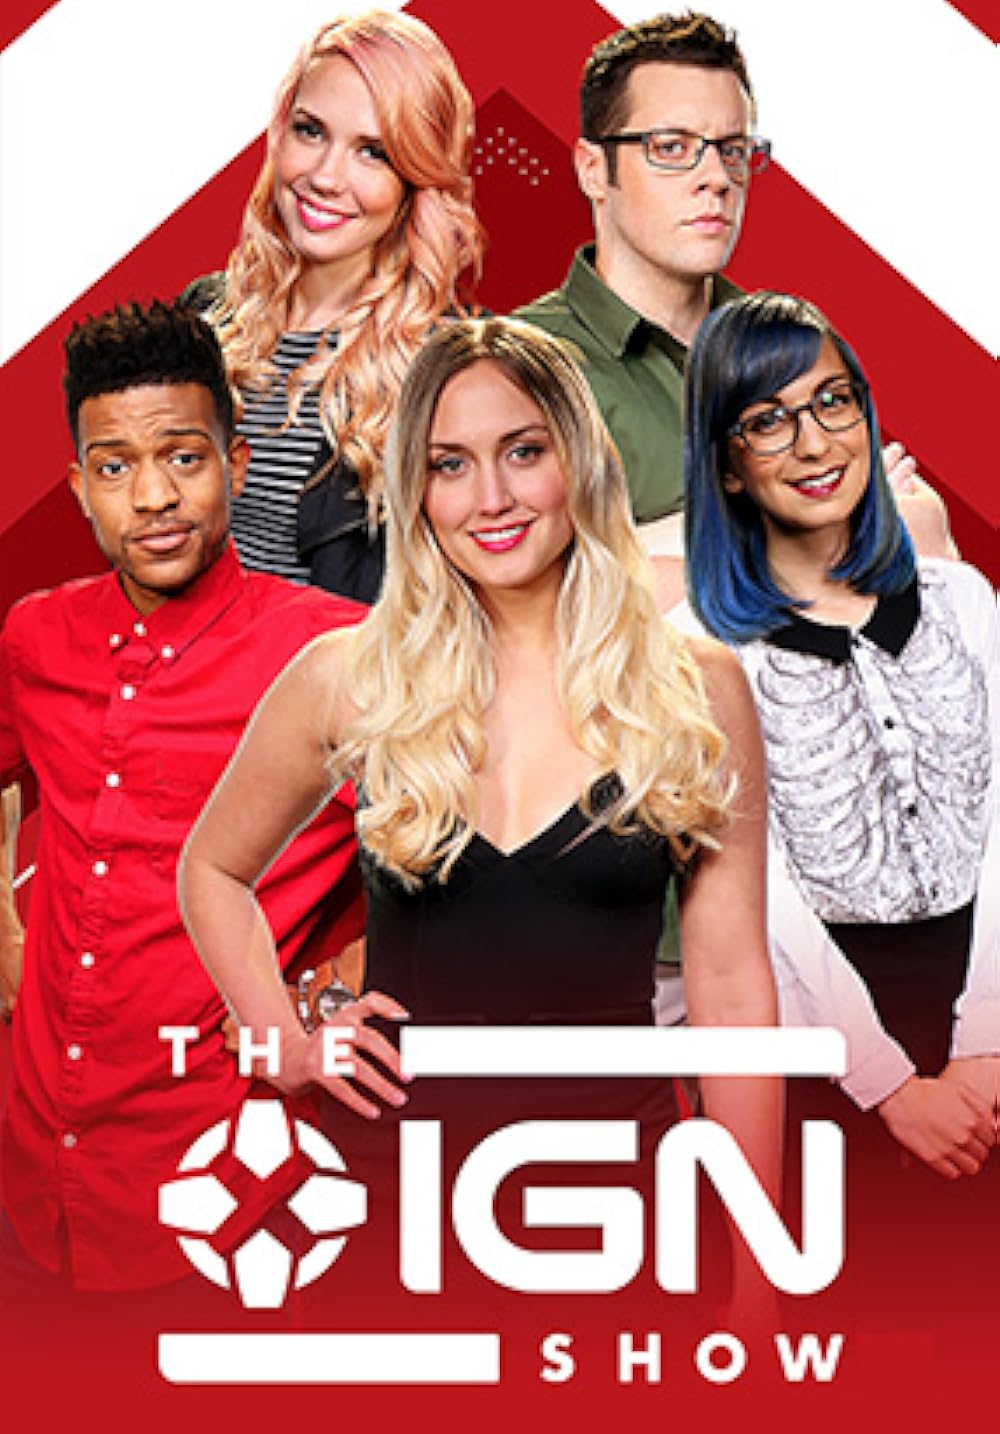 The IGN Show